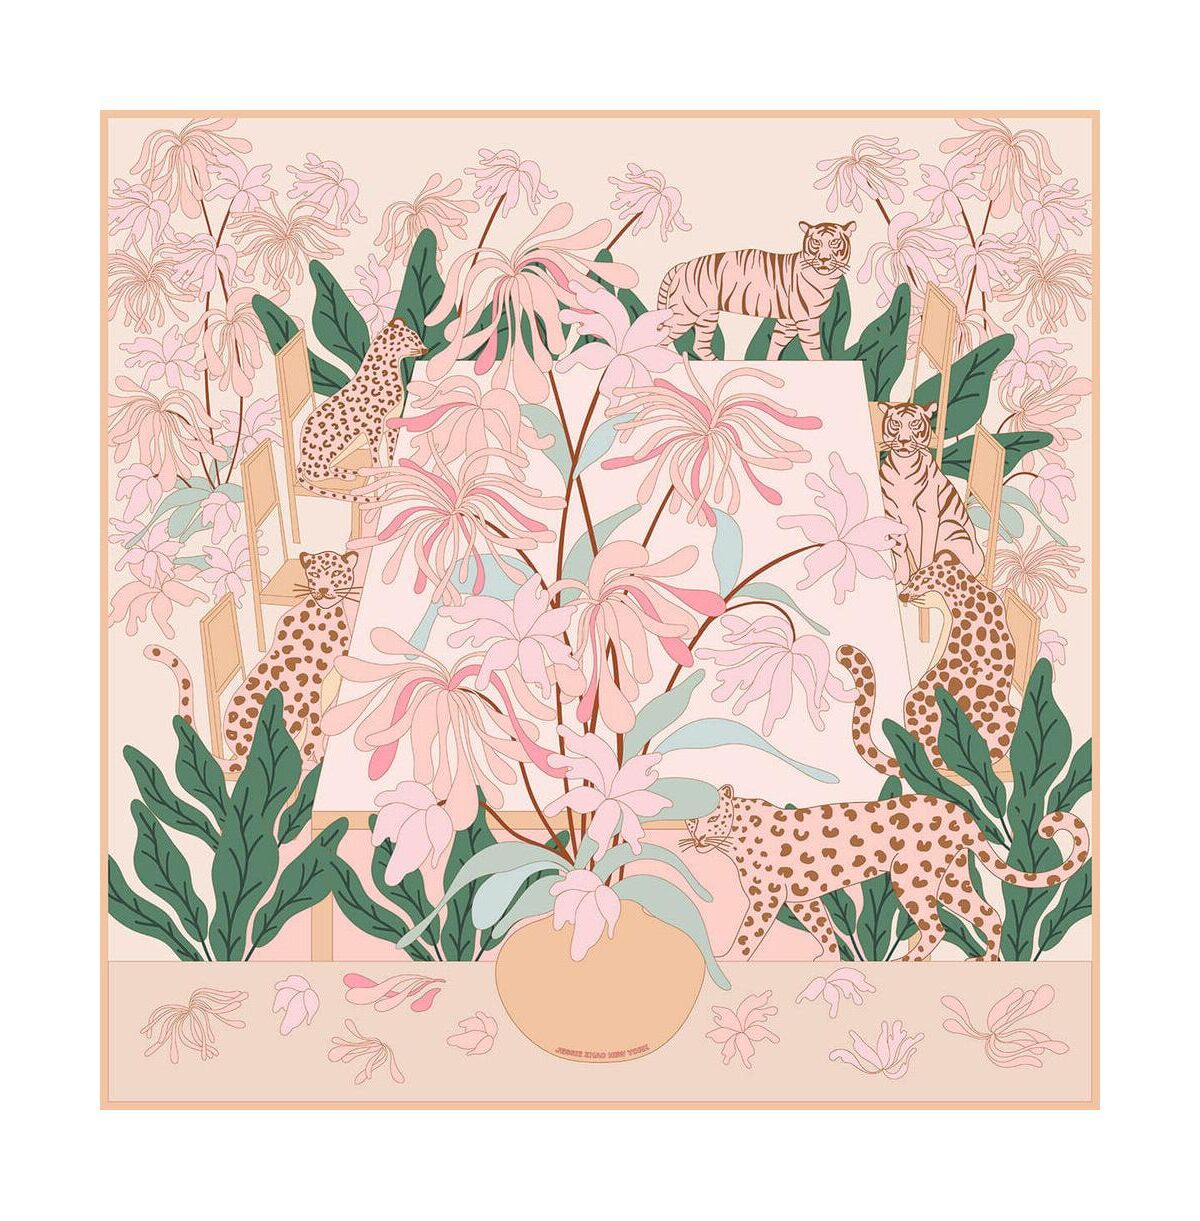 Jessie Zhao New York Double Sided Silk Scarf Of Jungle Gathering - Peach and pink